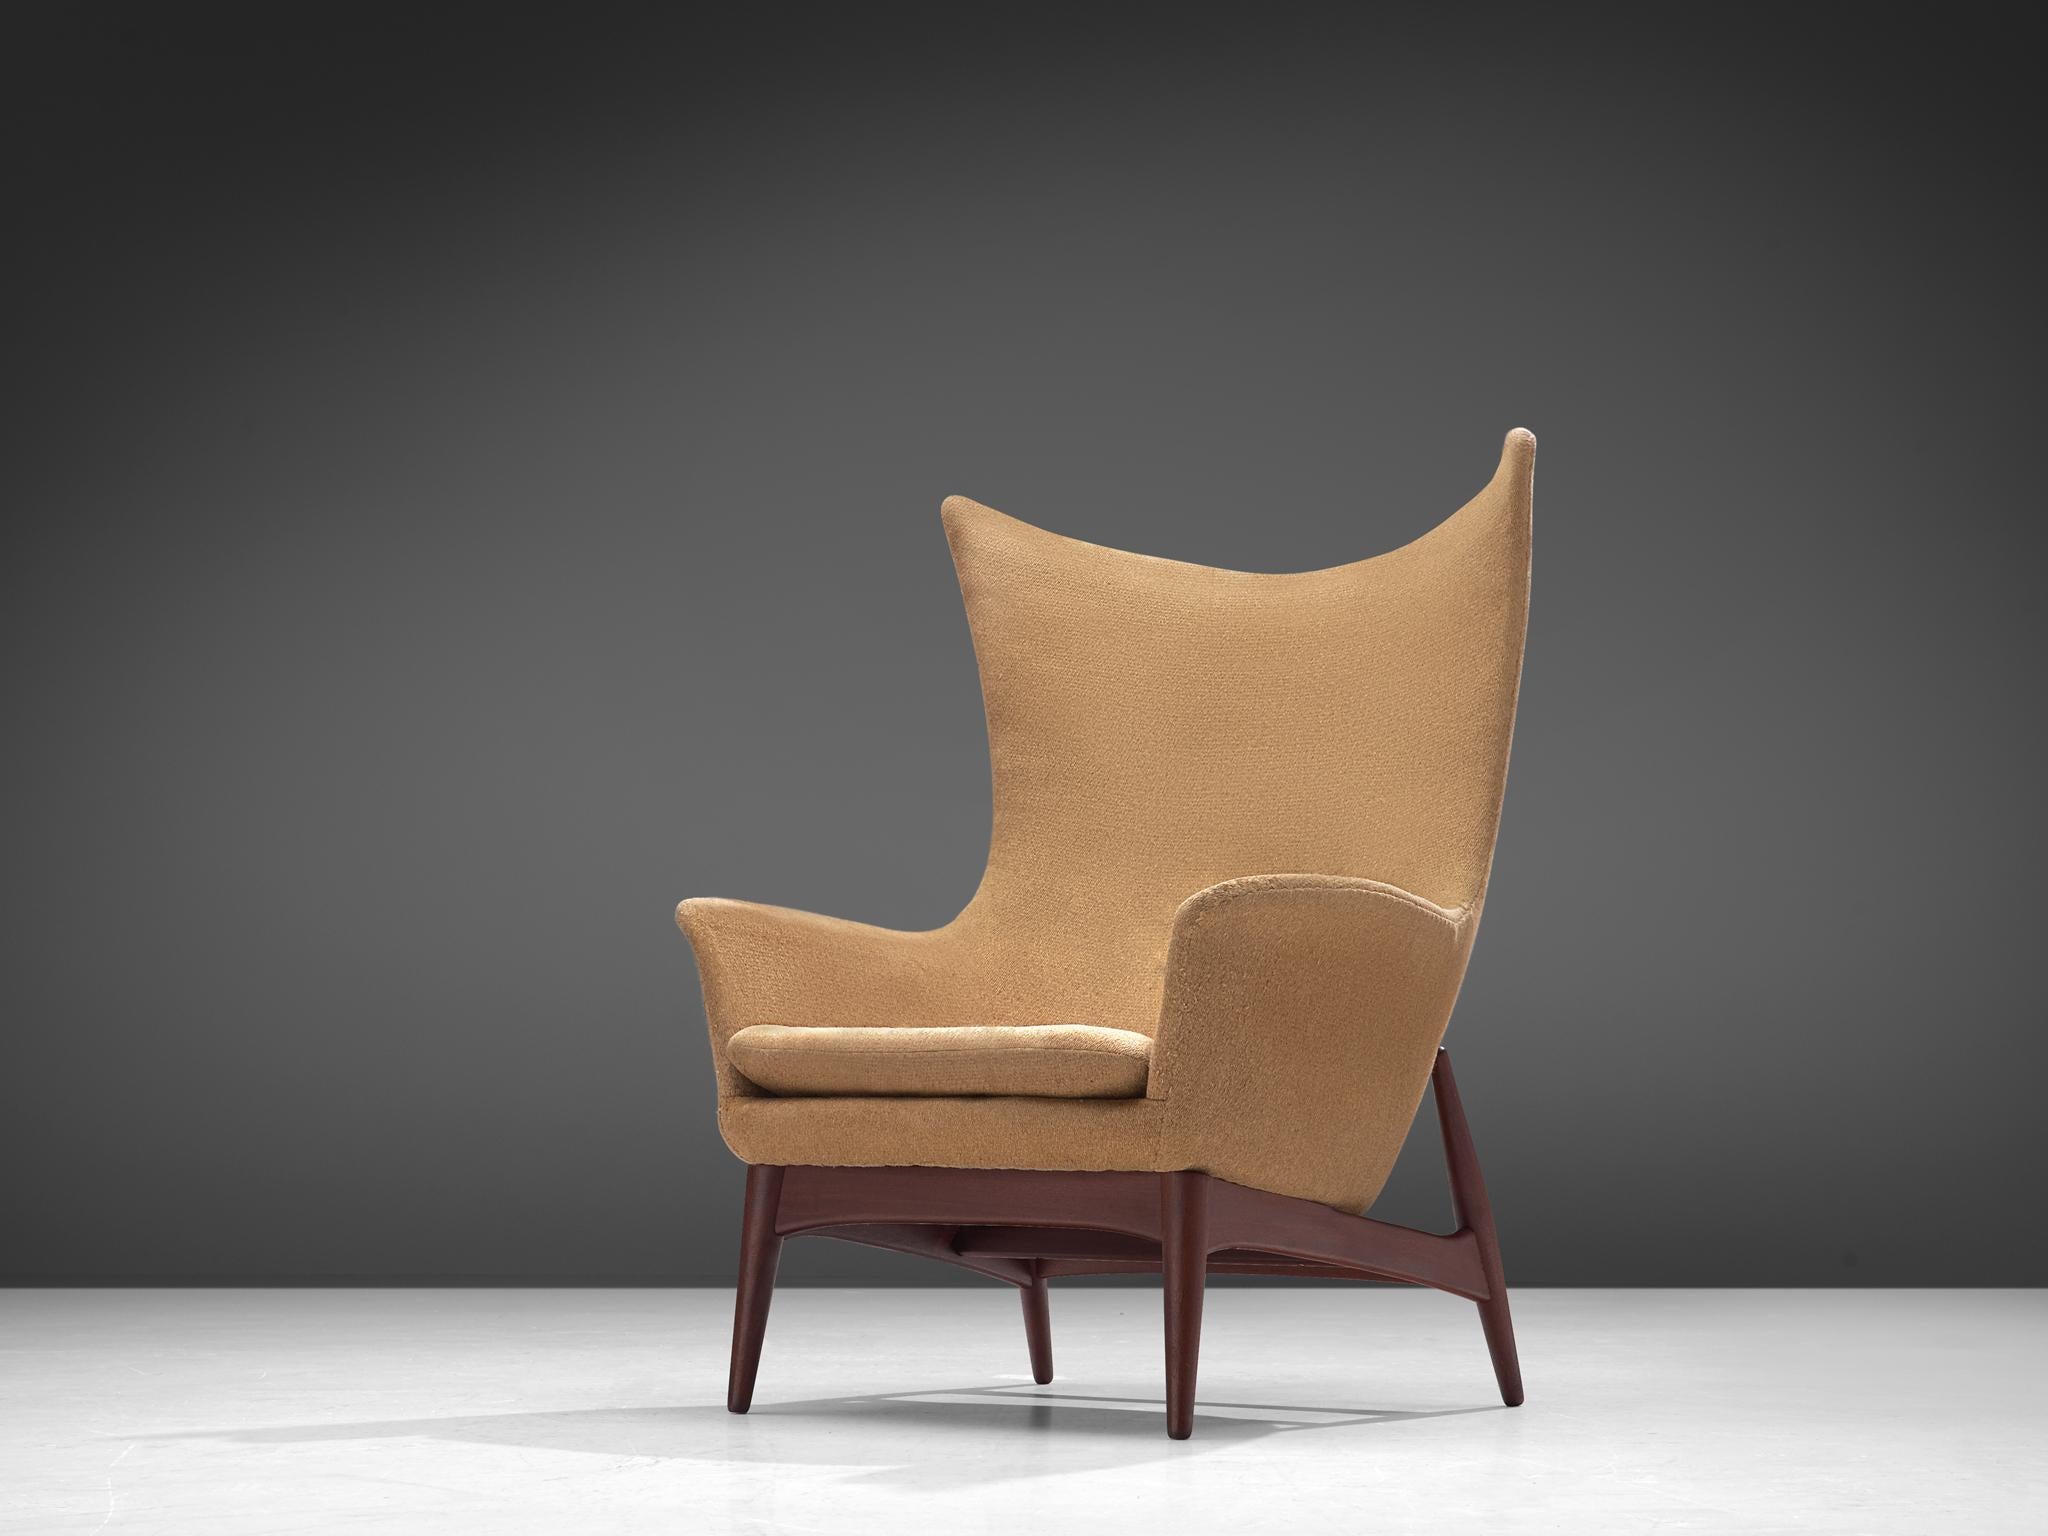 Lounge chair, fabric, teak, Denmark, 1960s

Sculptural egg-shaped lounge chair made in Denmark in the 1960s. This wingback chair is a wonderful example of Scandinavian design, featuring a high, shell inspired backrest that embraces the seater. The